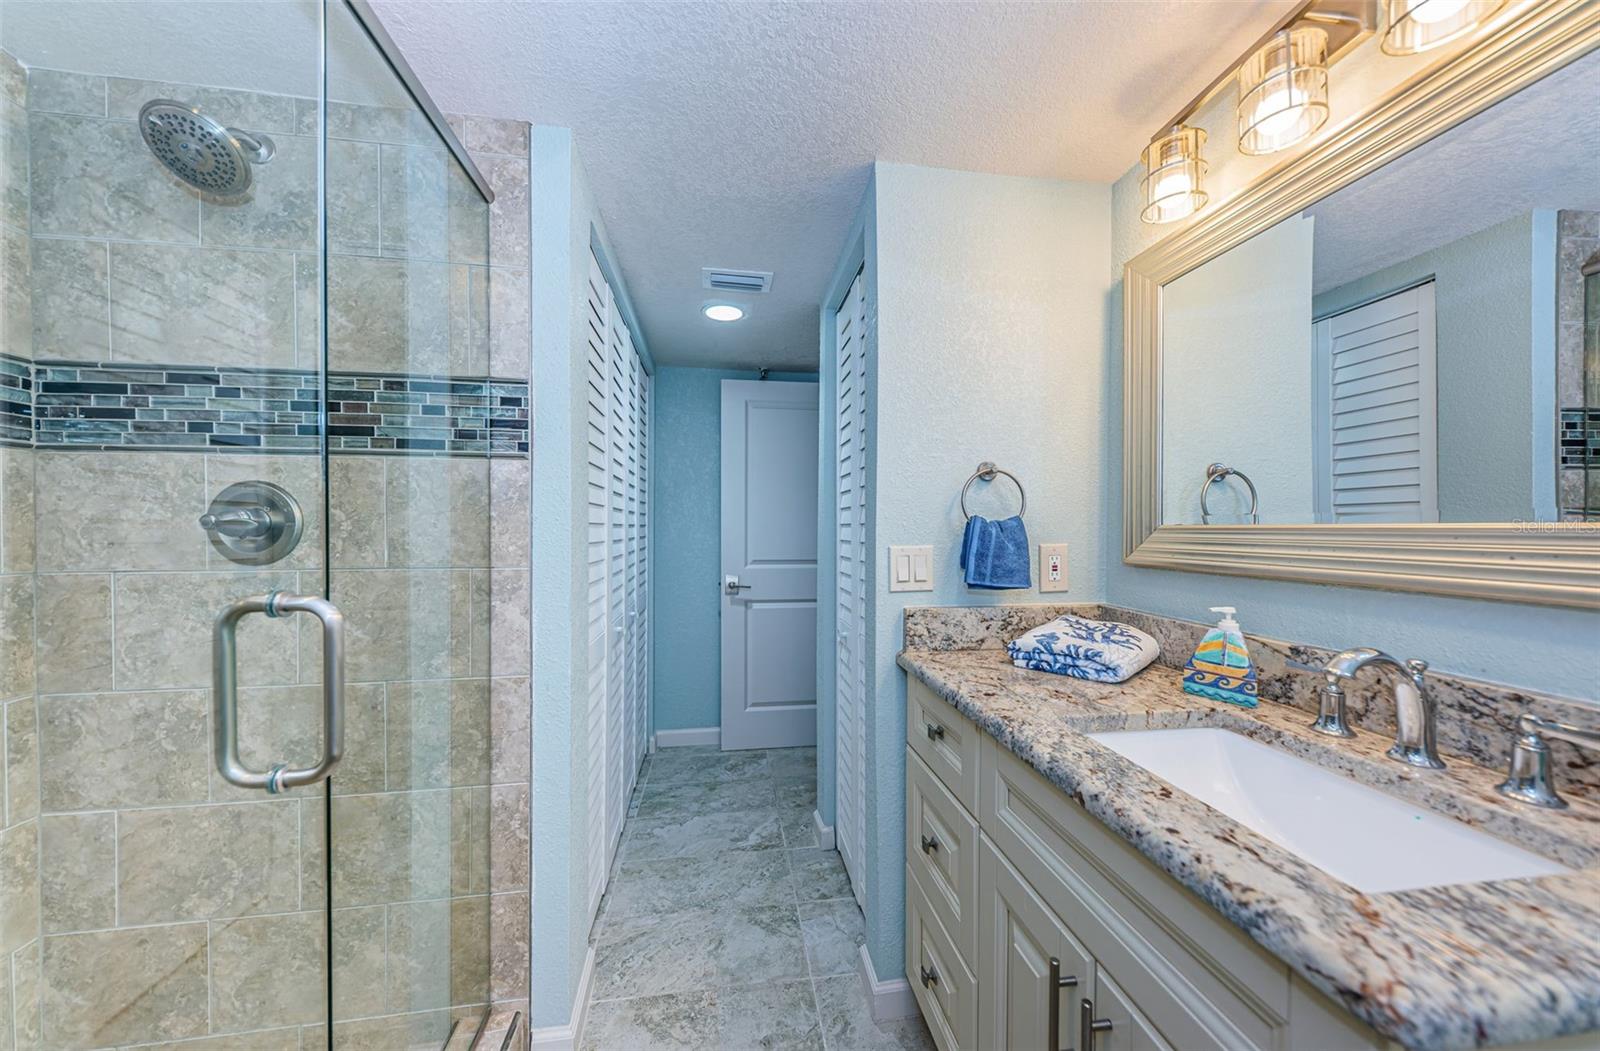 .. Beautiful Remodeled Guest Bathroom..12.1 x 8.1.... Laundry Closet on Left by Bathroom Entry Door.